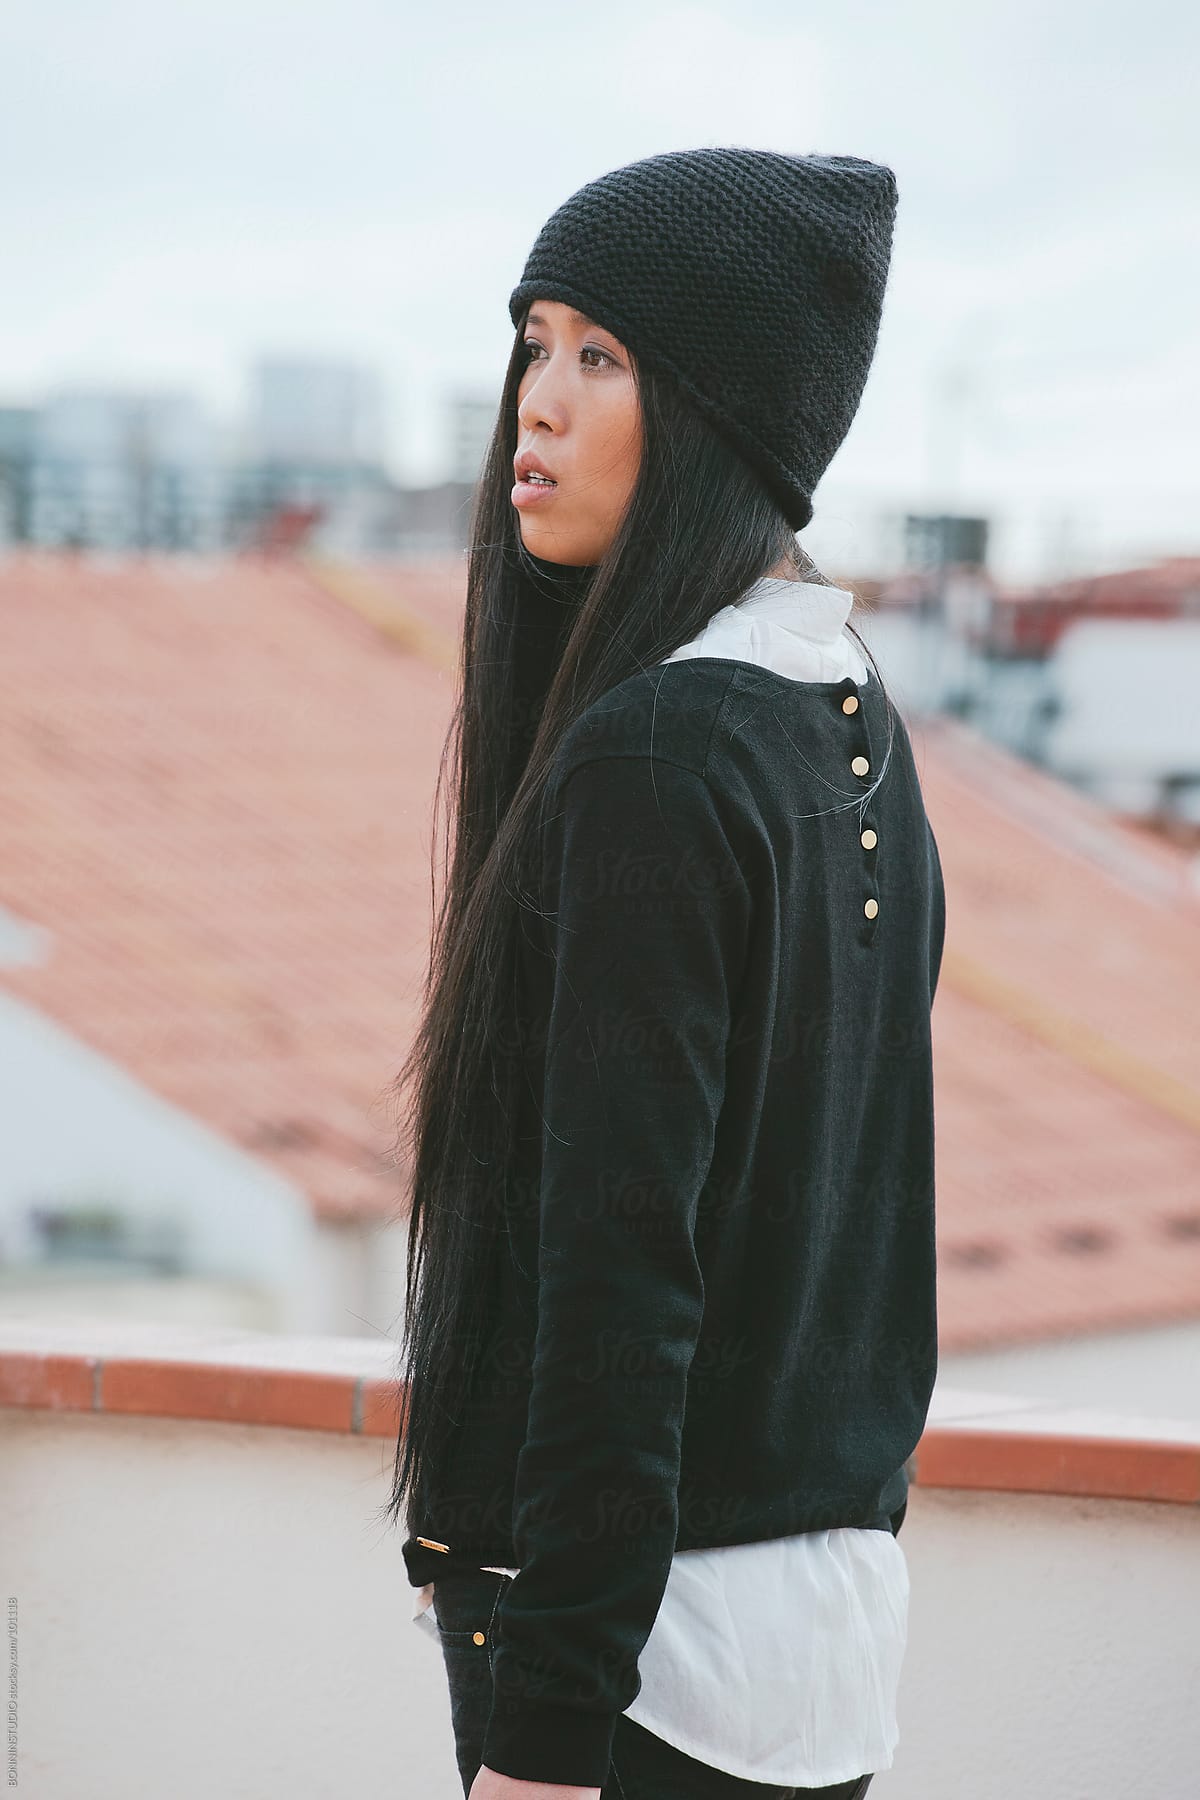 Young chinese woman standing on a terrace overlooking the city.